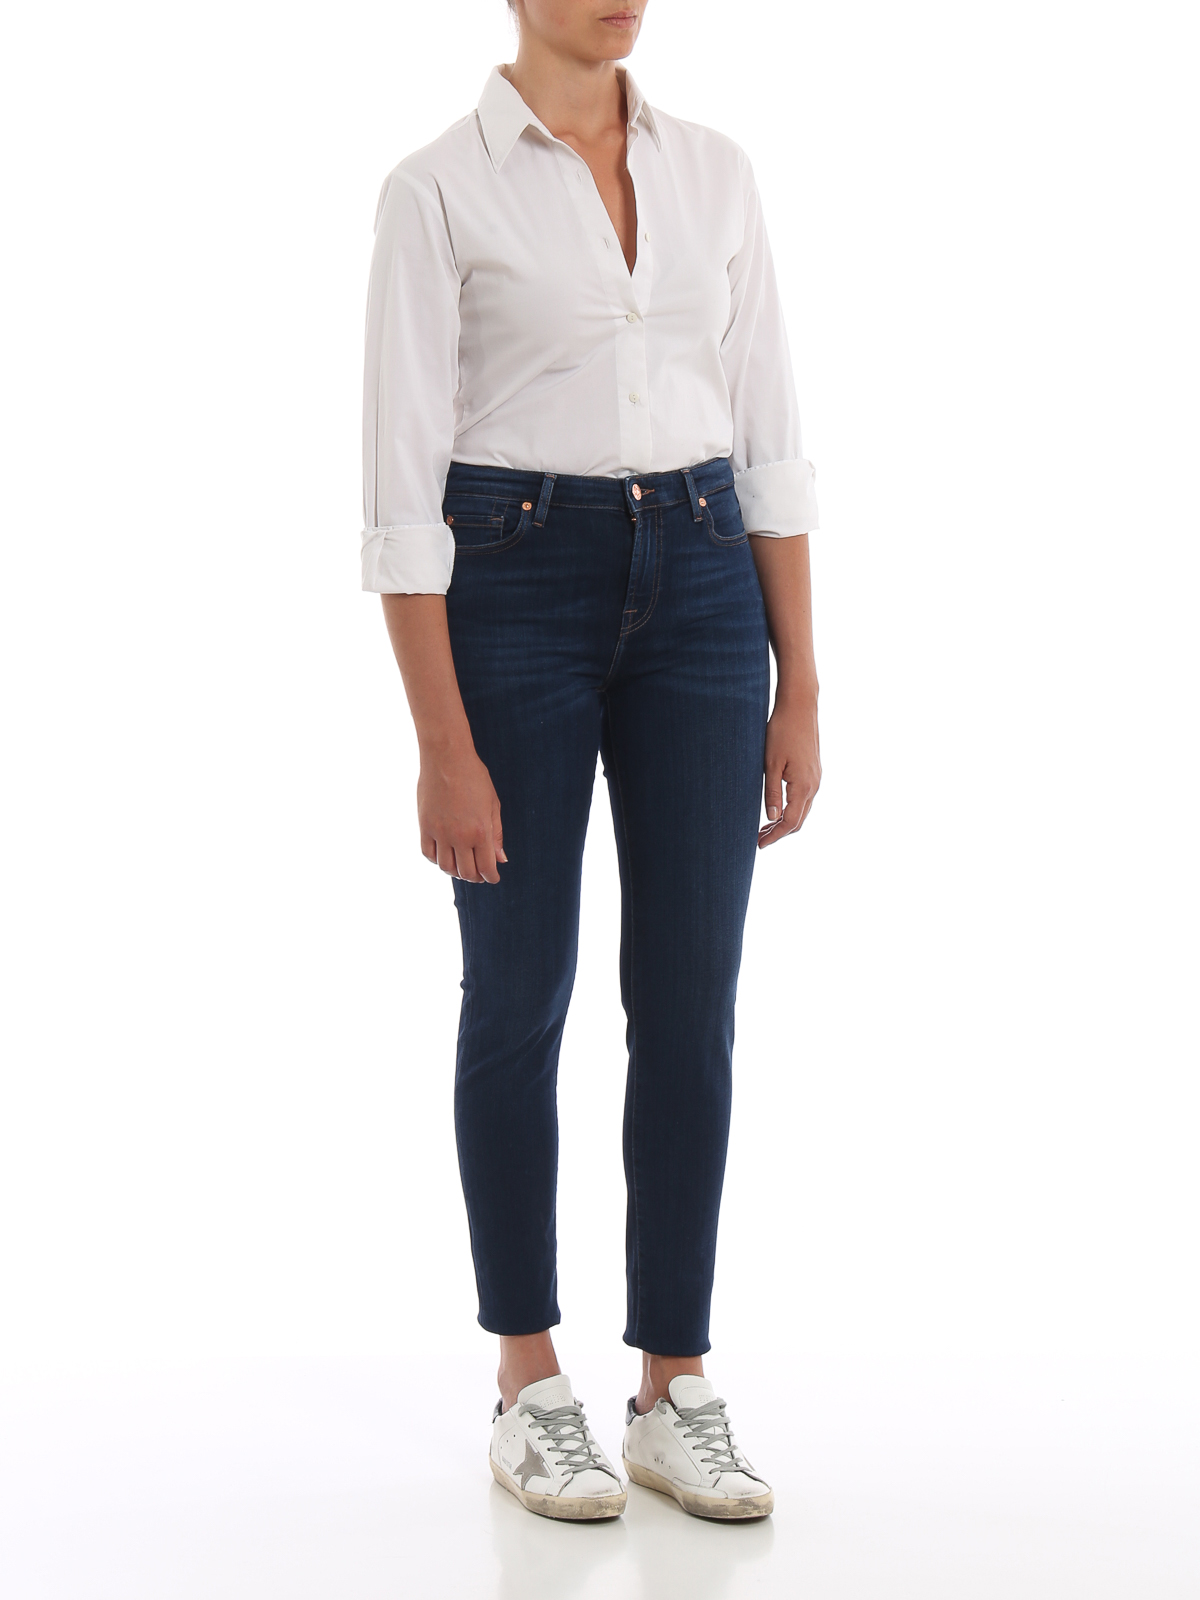 pyper jeans 7 for all mankind